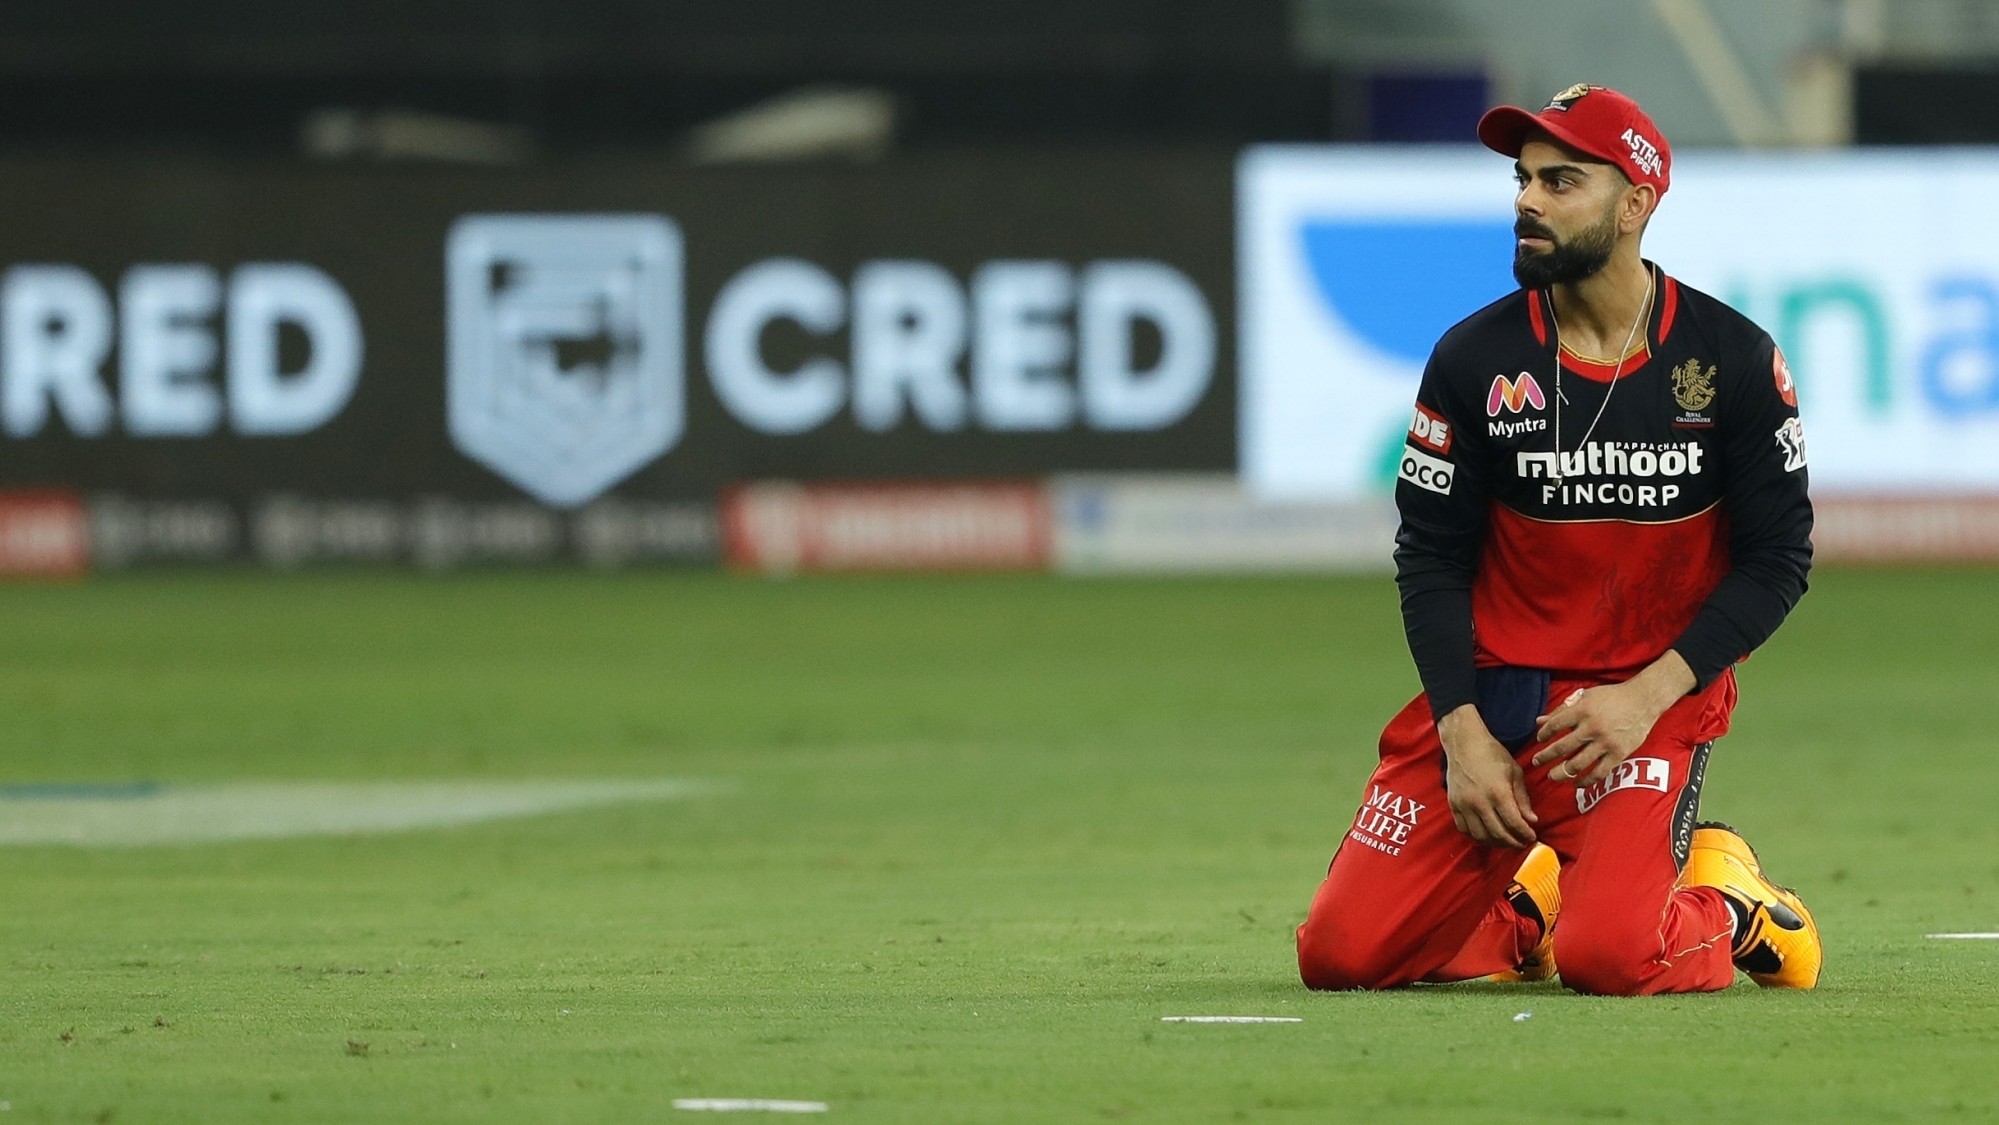 IPL 2020: ‘We didn’t bring our ‘A’ game and top intensity’, says Virat Kohli after RCB’s big loss to DC